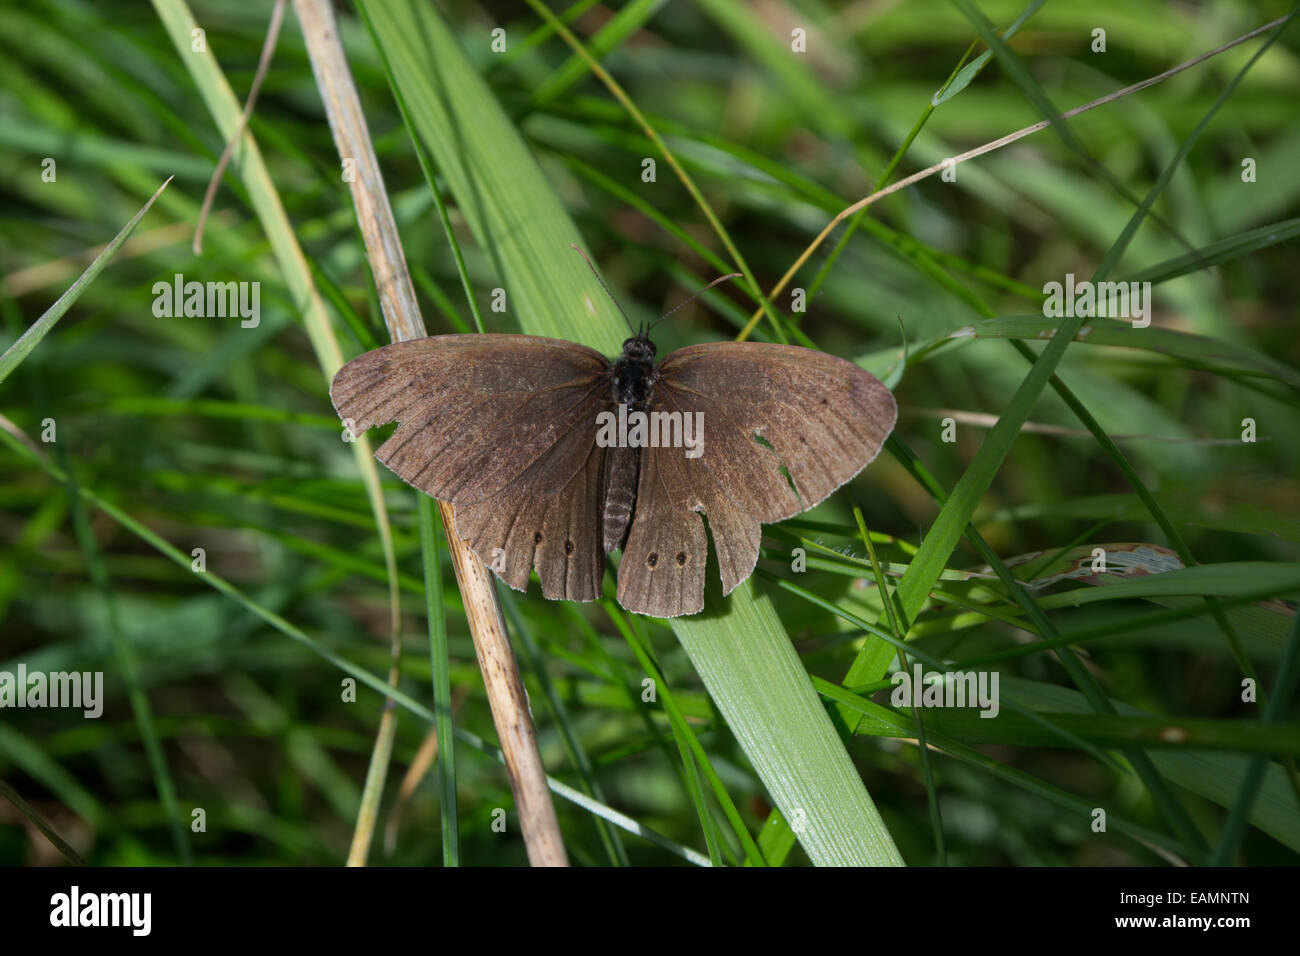 Study of a Brown Ringlet butterfly resting on a blade of grass in the sunlight Stock Photo